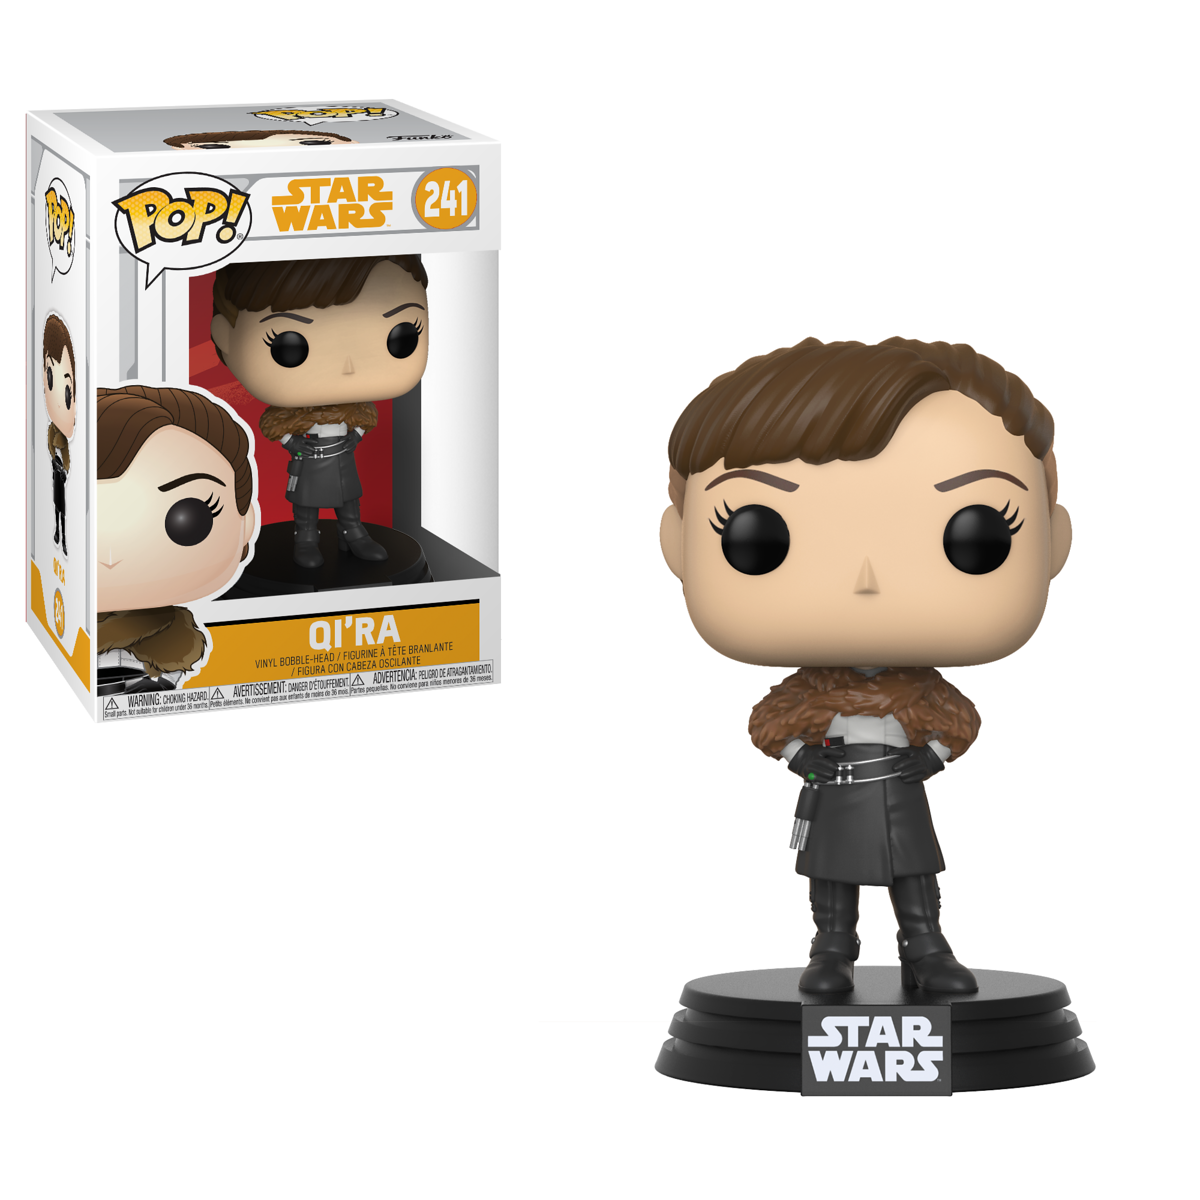 Solo: A Star Wars Story Toys